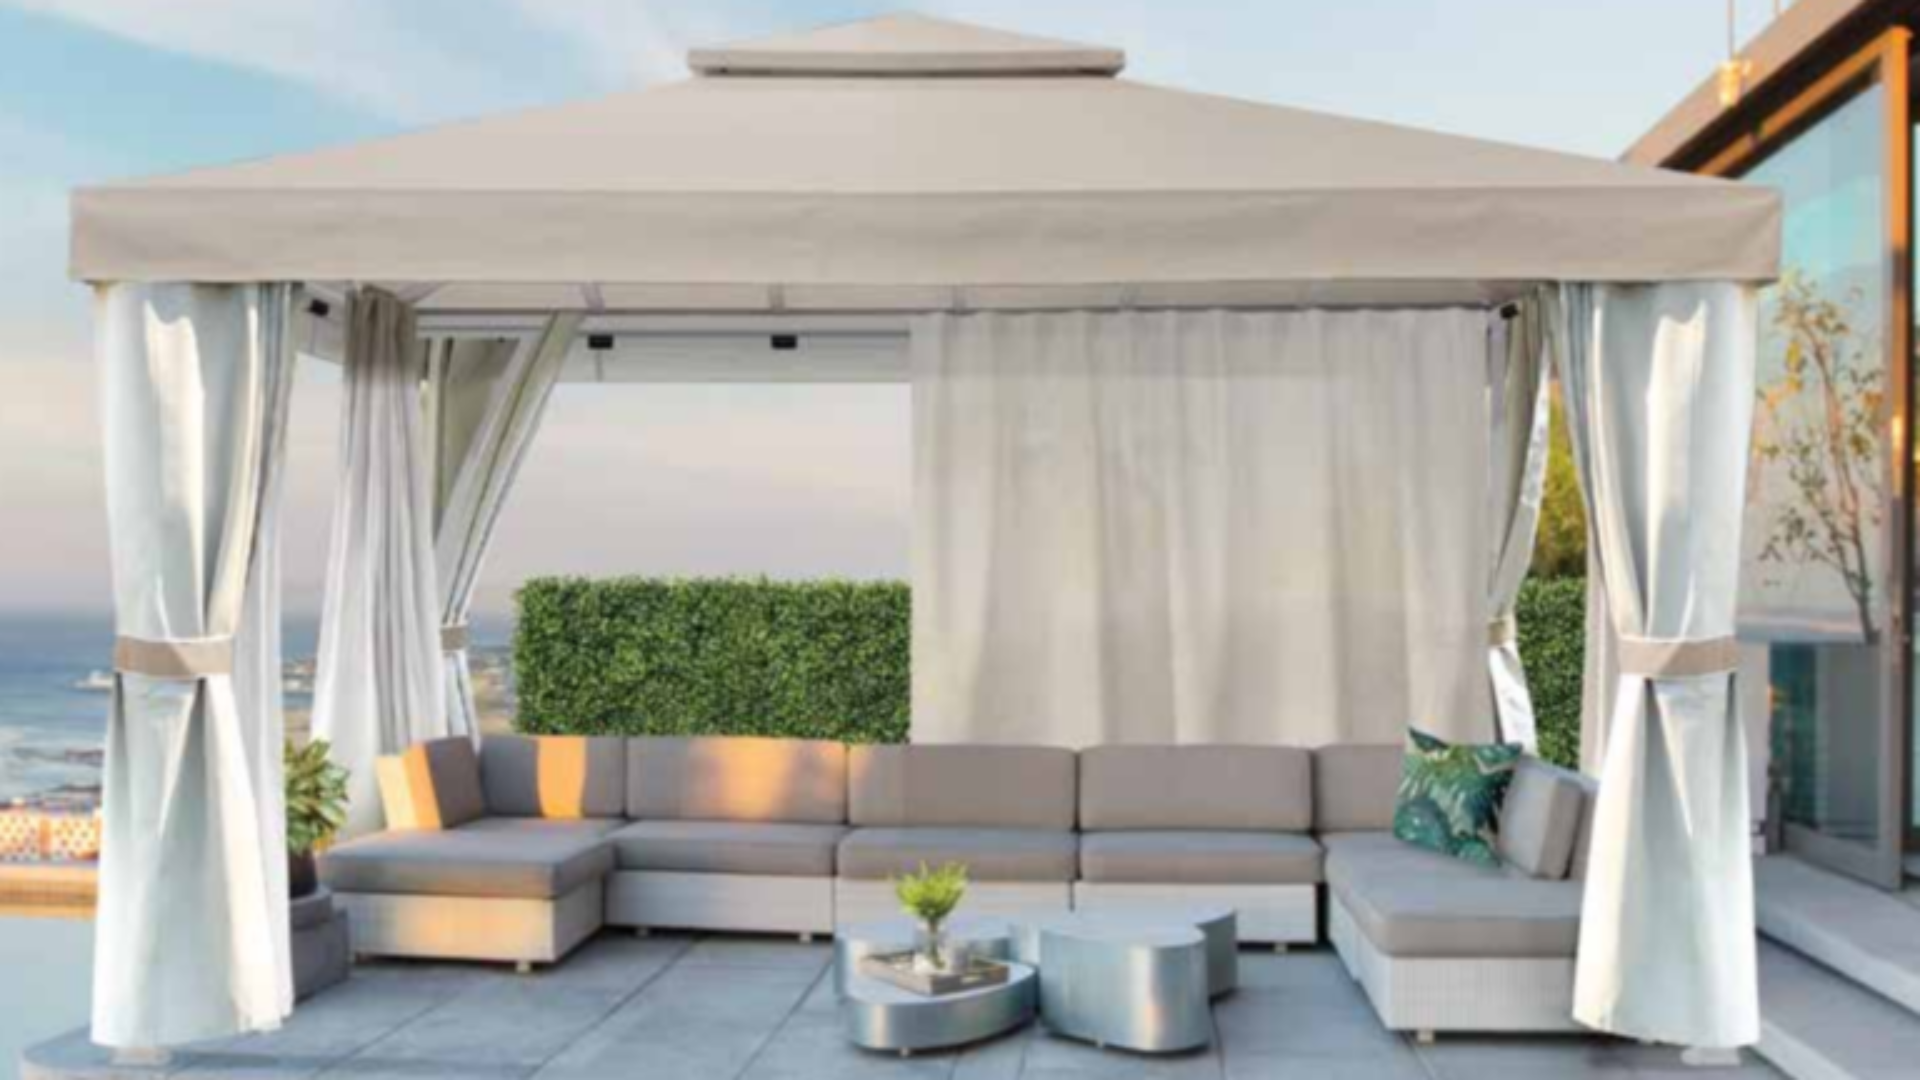 Finding the Right Covering Options When Purchasing an Open Air Cabana